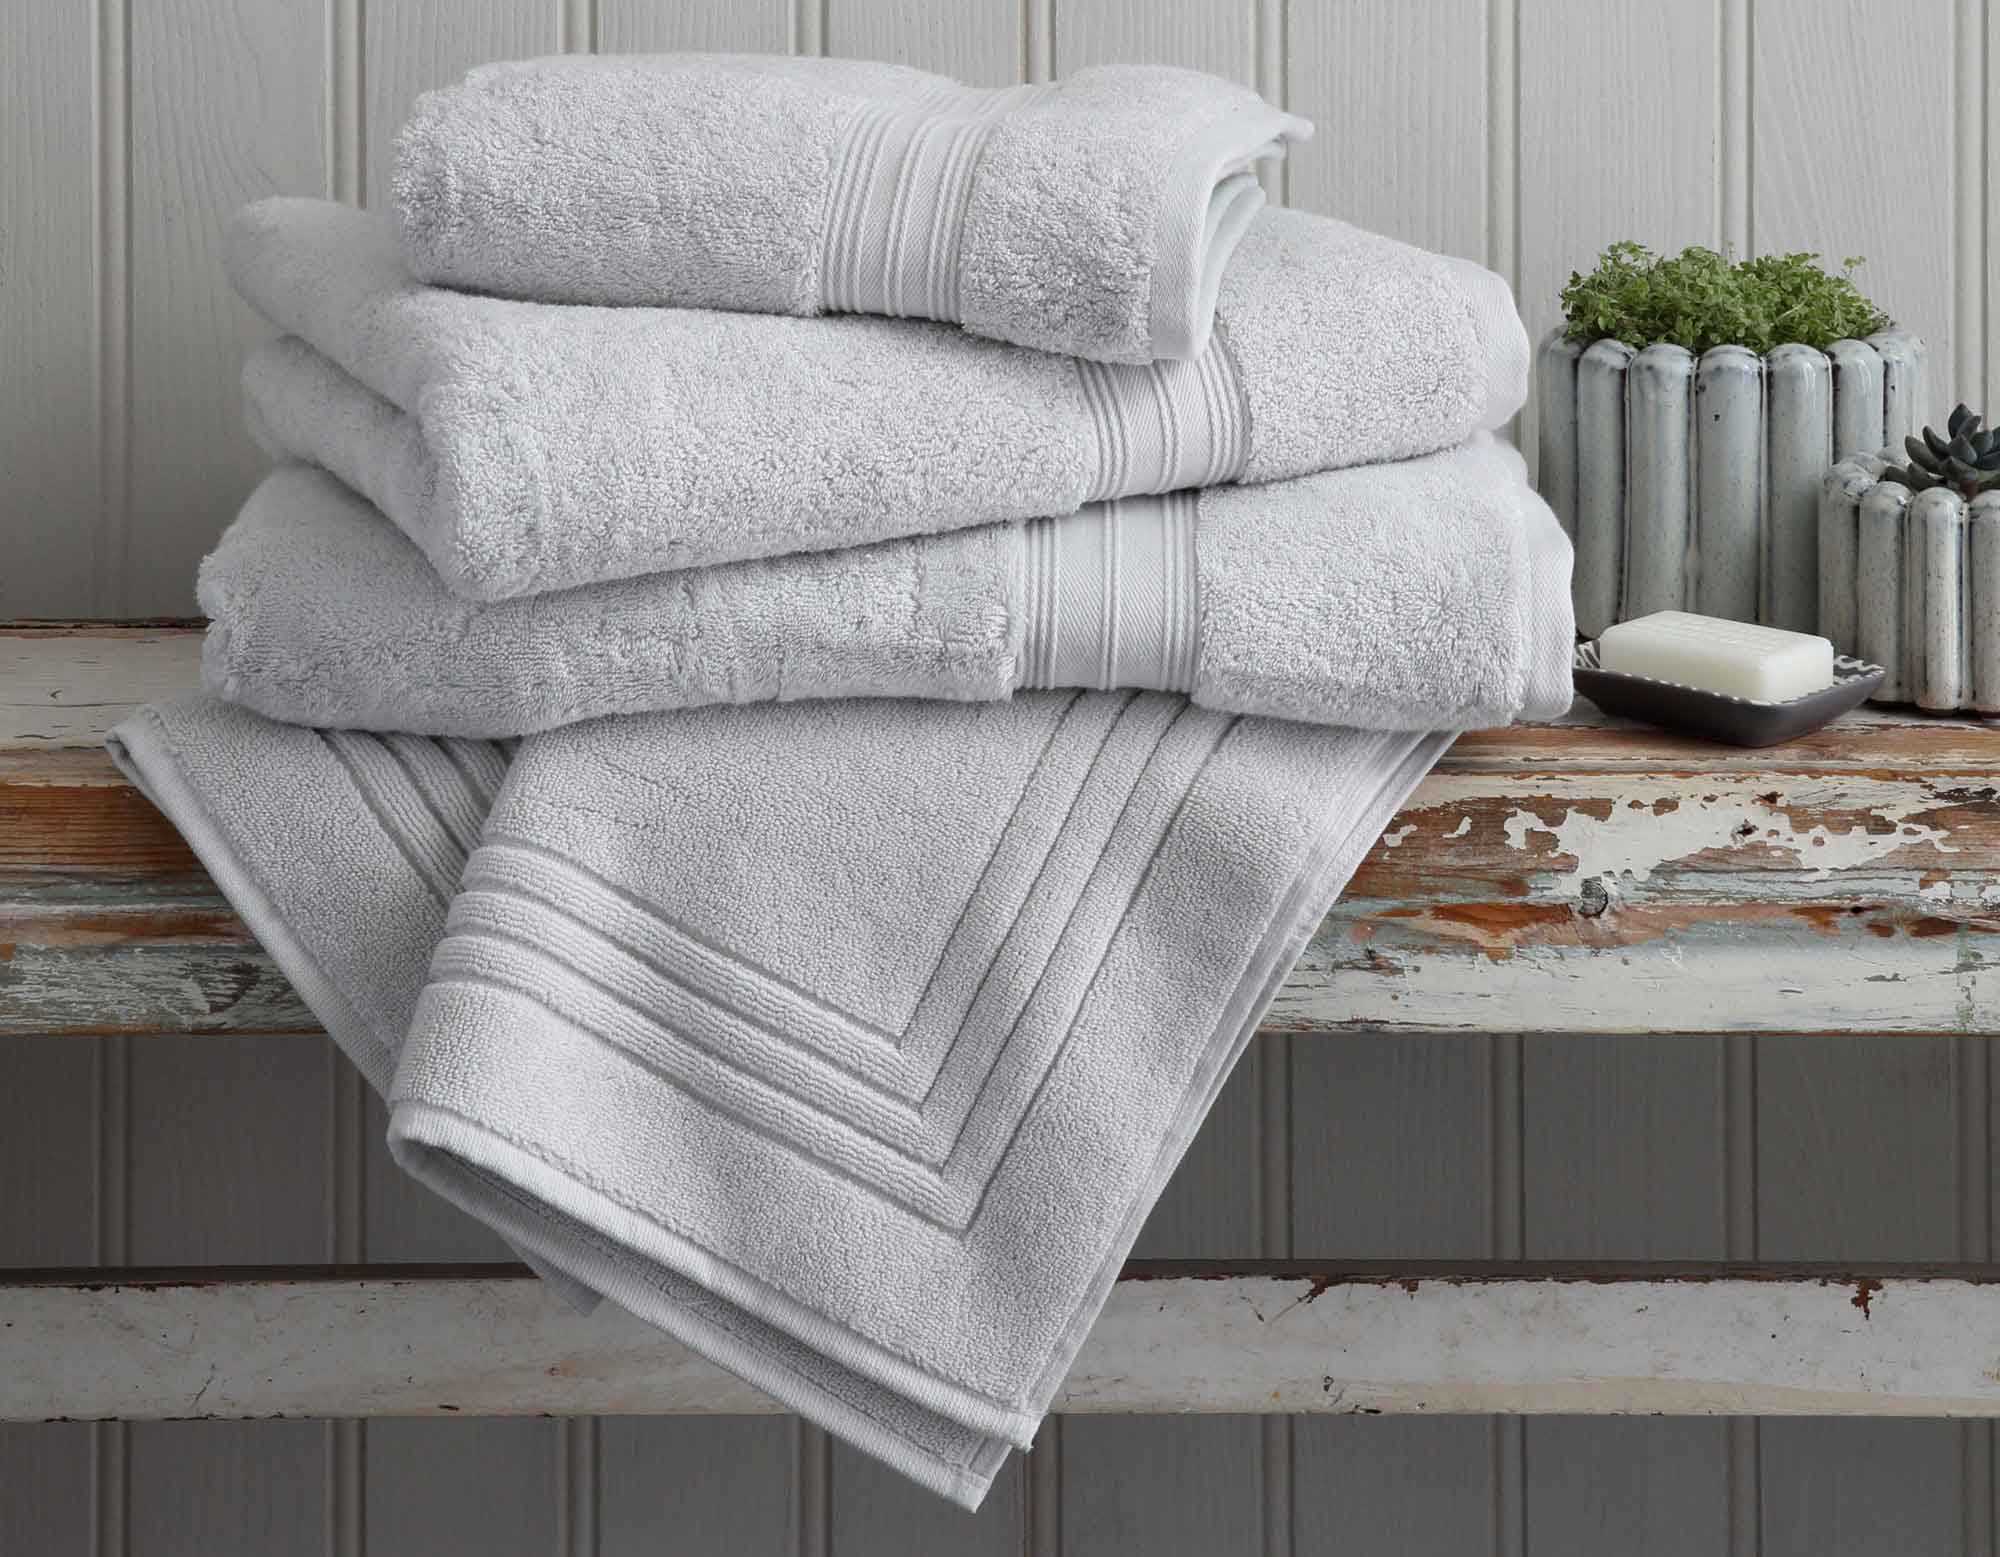 Bundle of pearl grey towels and bath mat on rustic bench with soap and natural grey vase